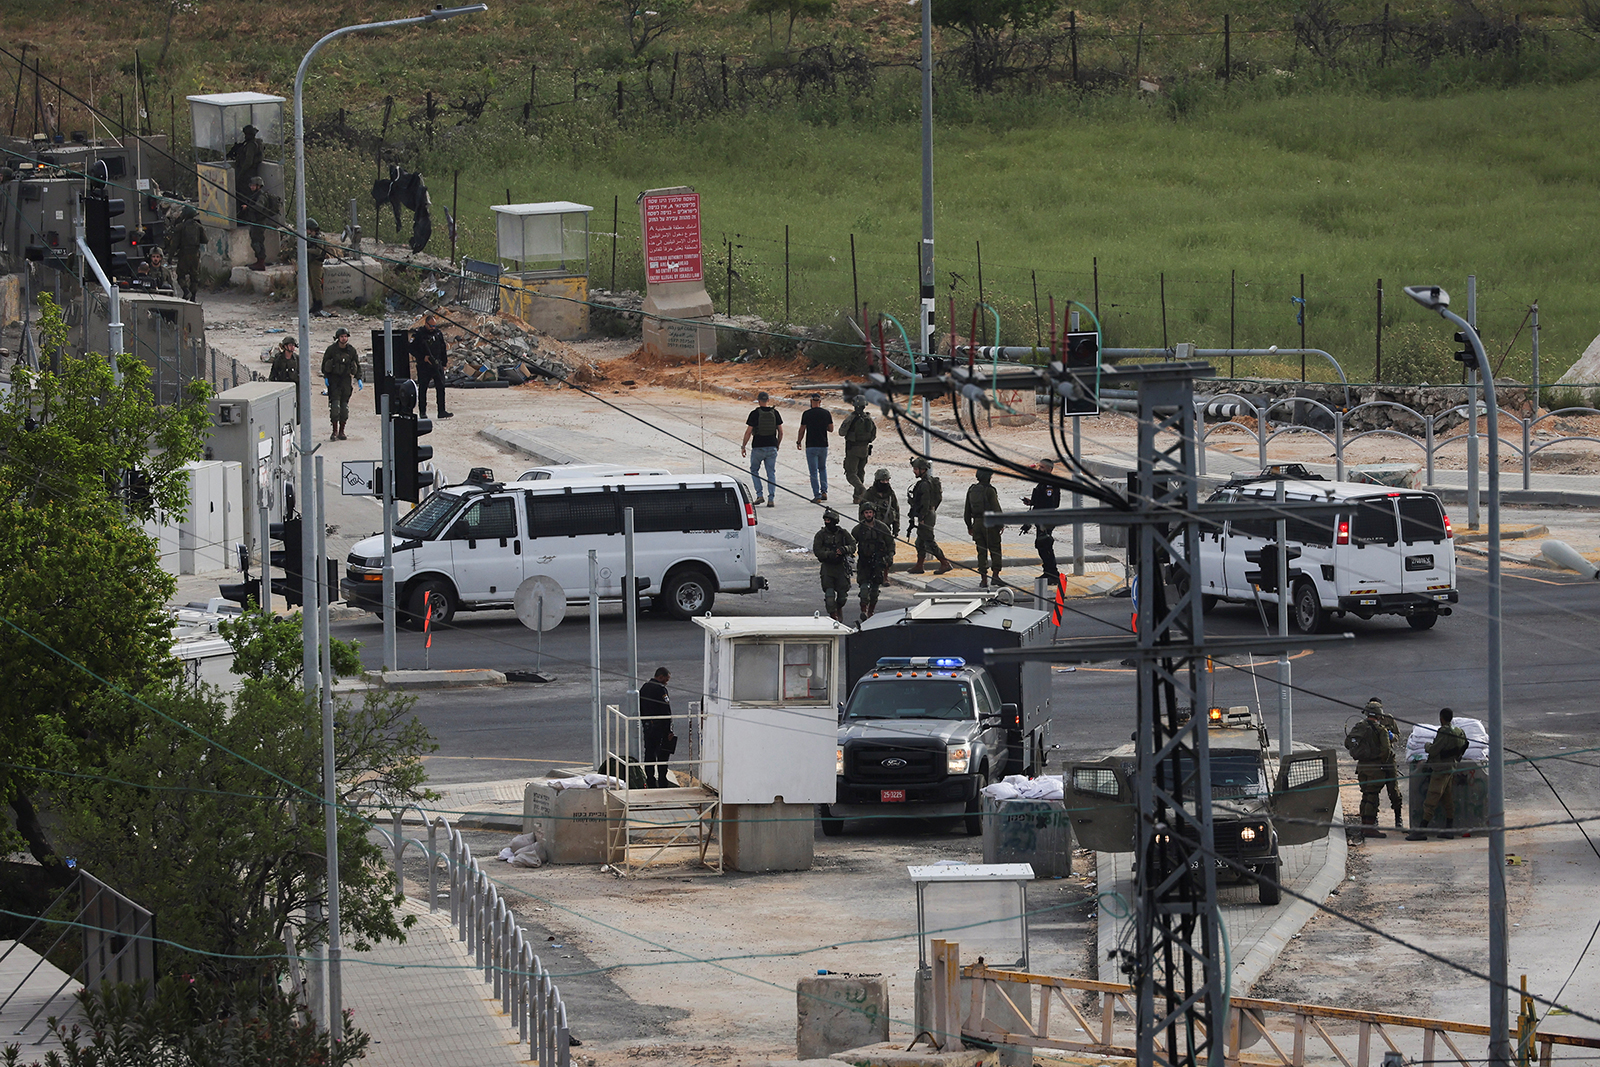 Israeli troops stand guard near the scene of a shooting near Hebron in the Israeli-occupied West Bank on April 21.